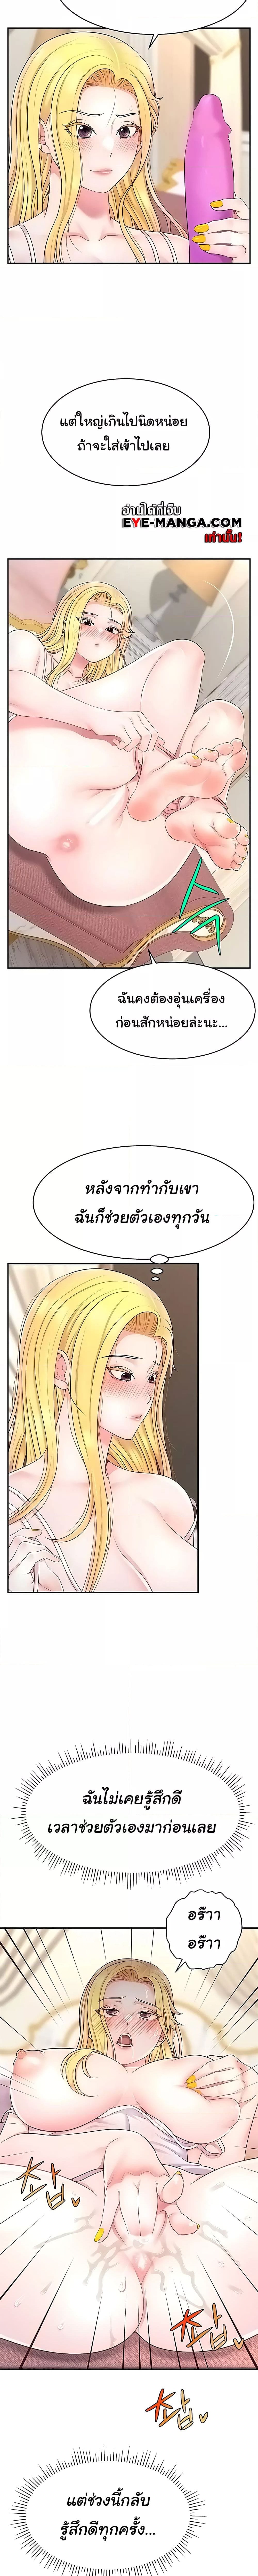 Making Friends With Streamers by Hacking! ตอนที่ 12 ภาพ 14